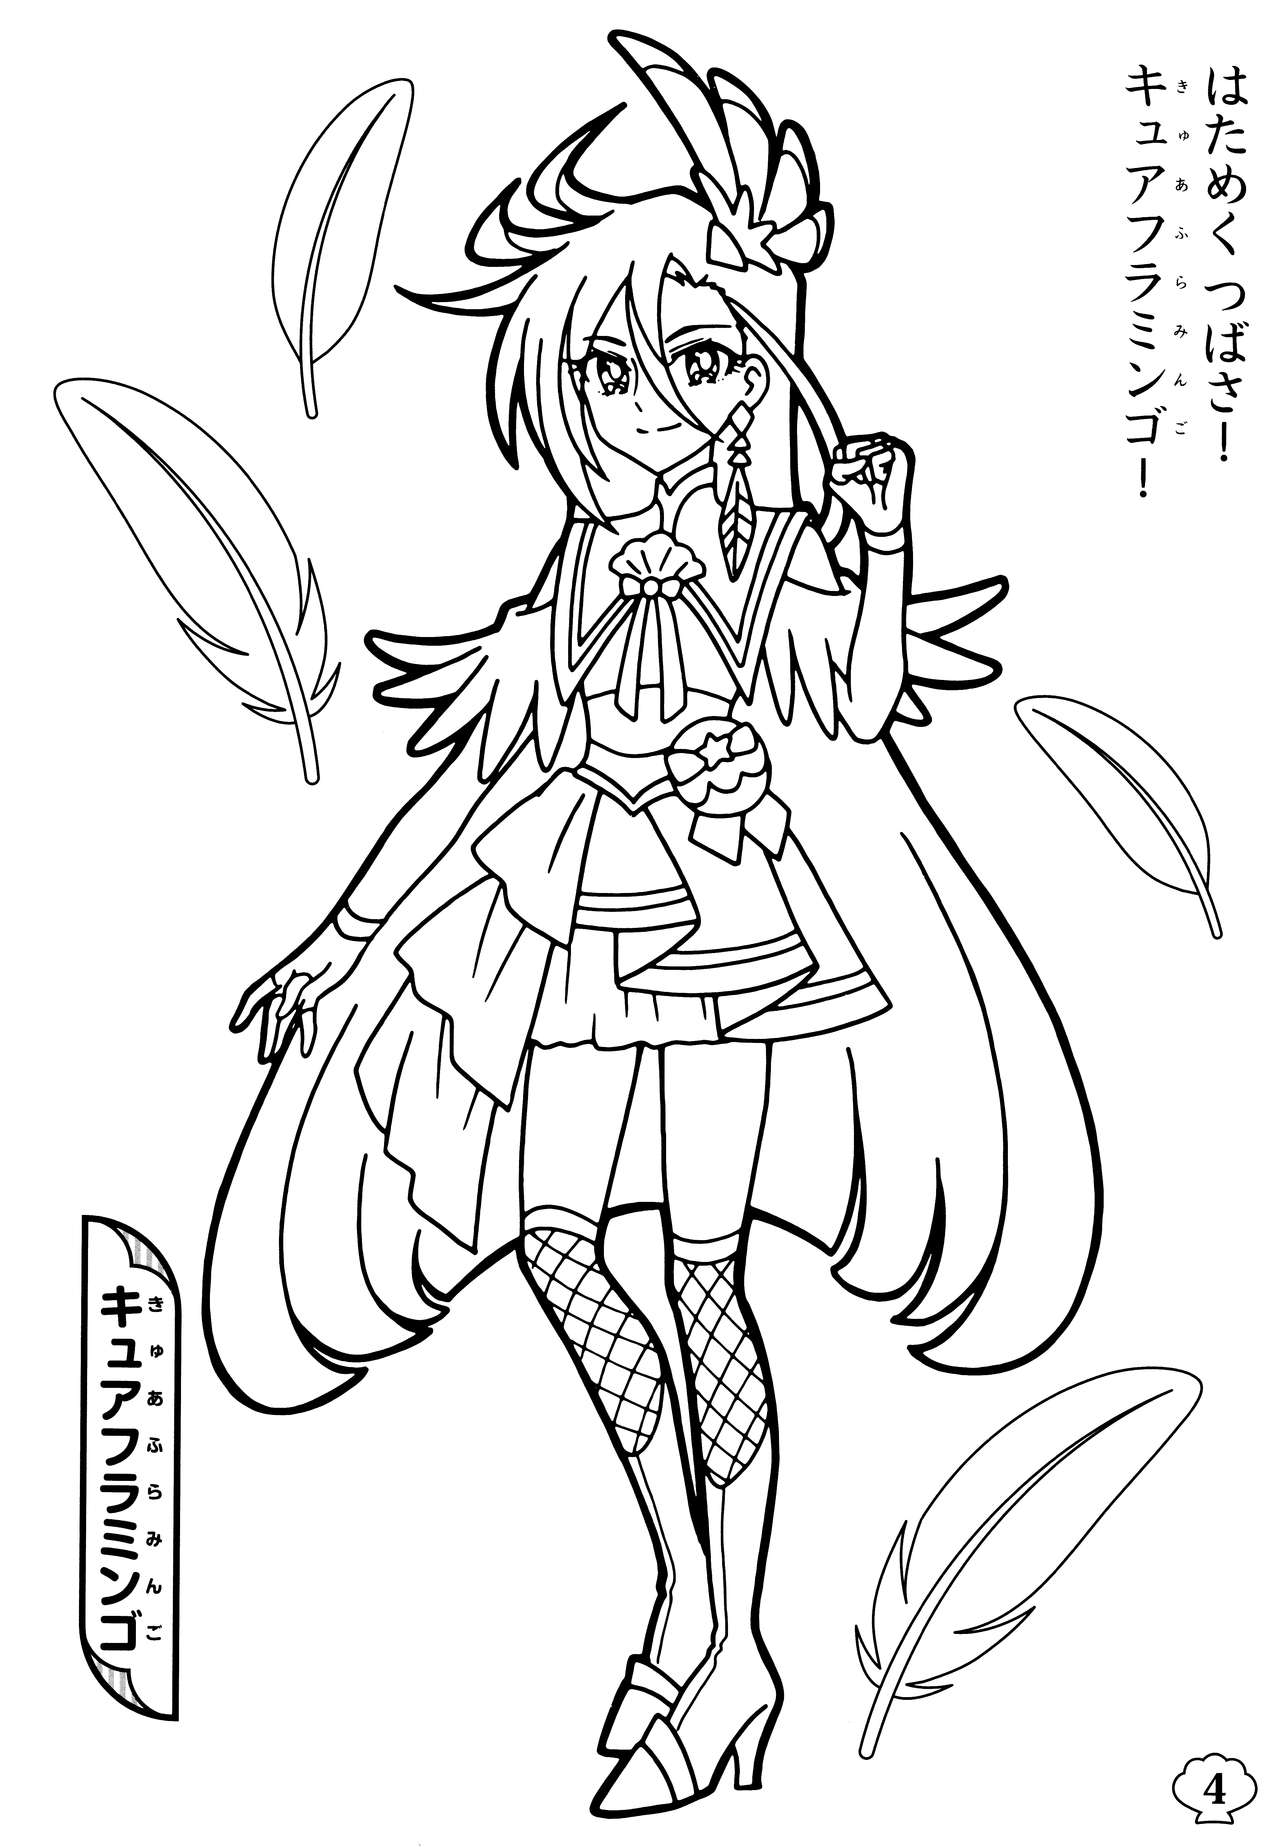 Tropical Rouge Precure Coloring book 2 7